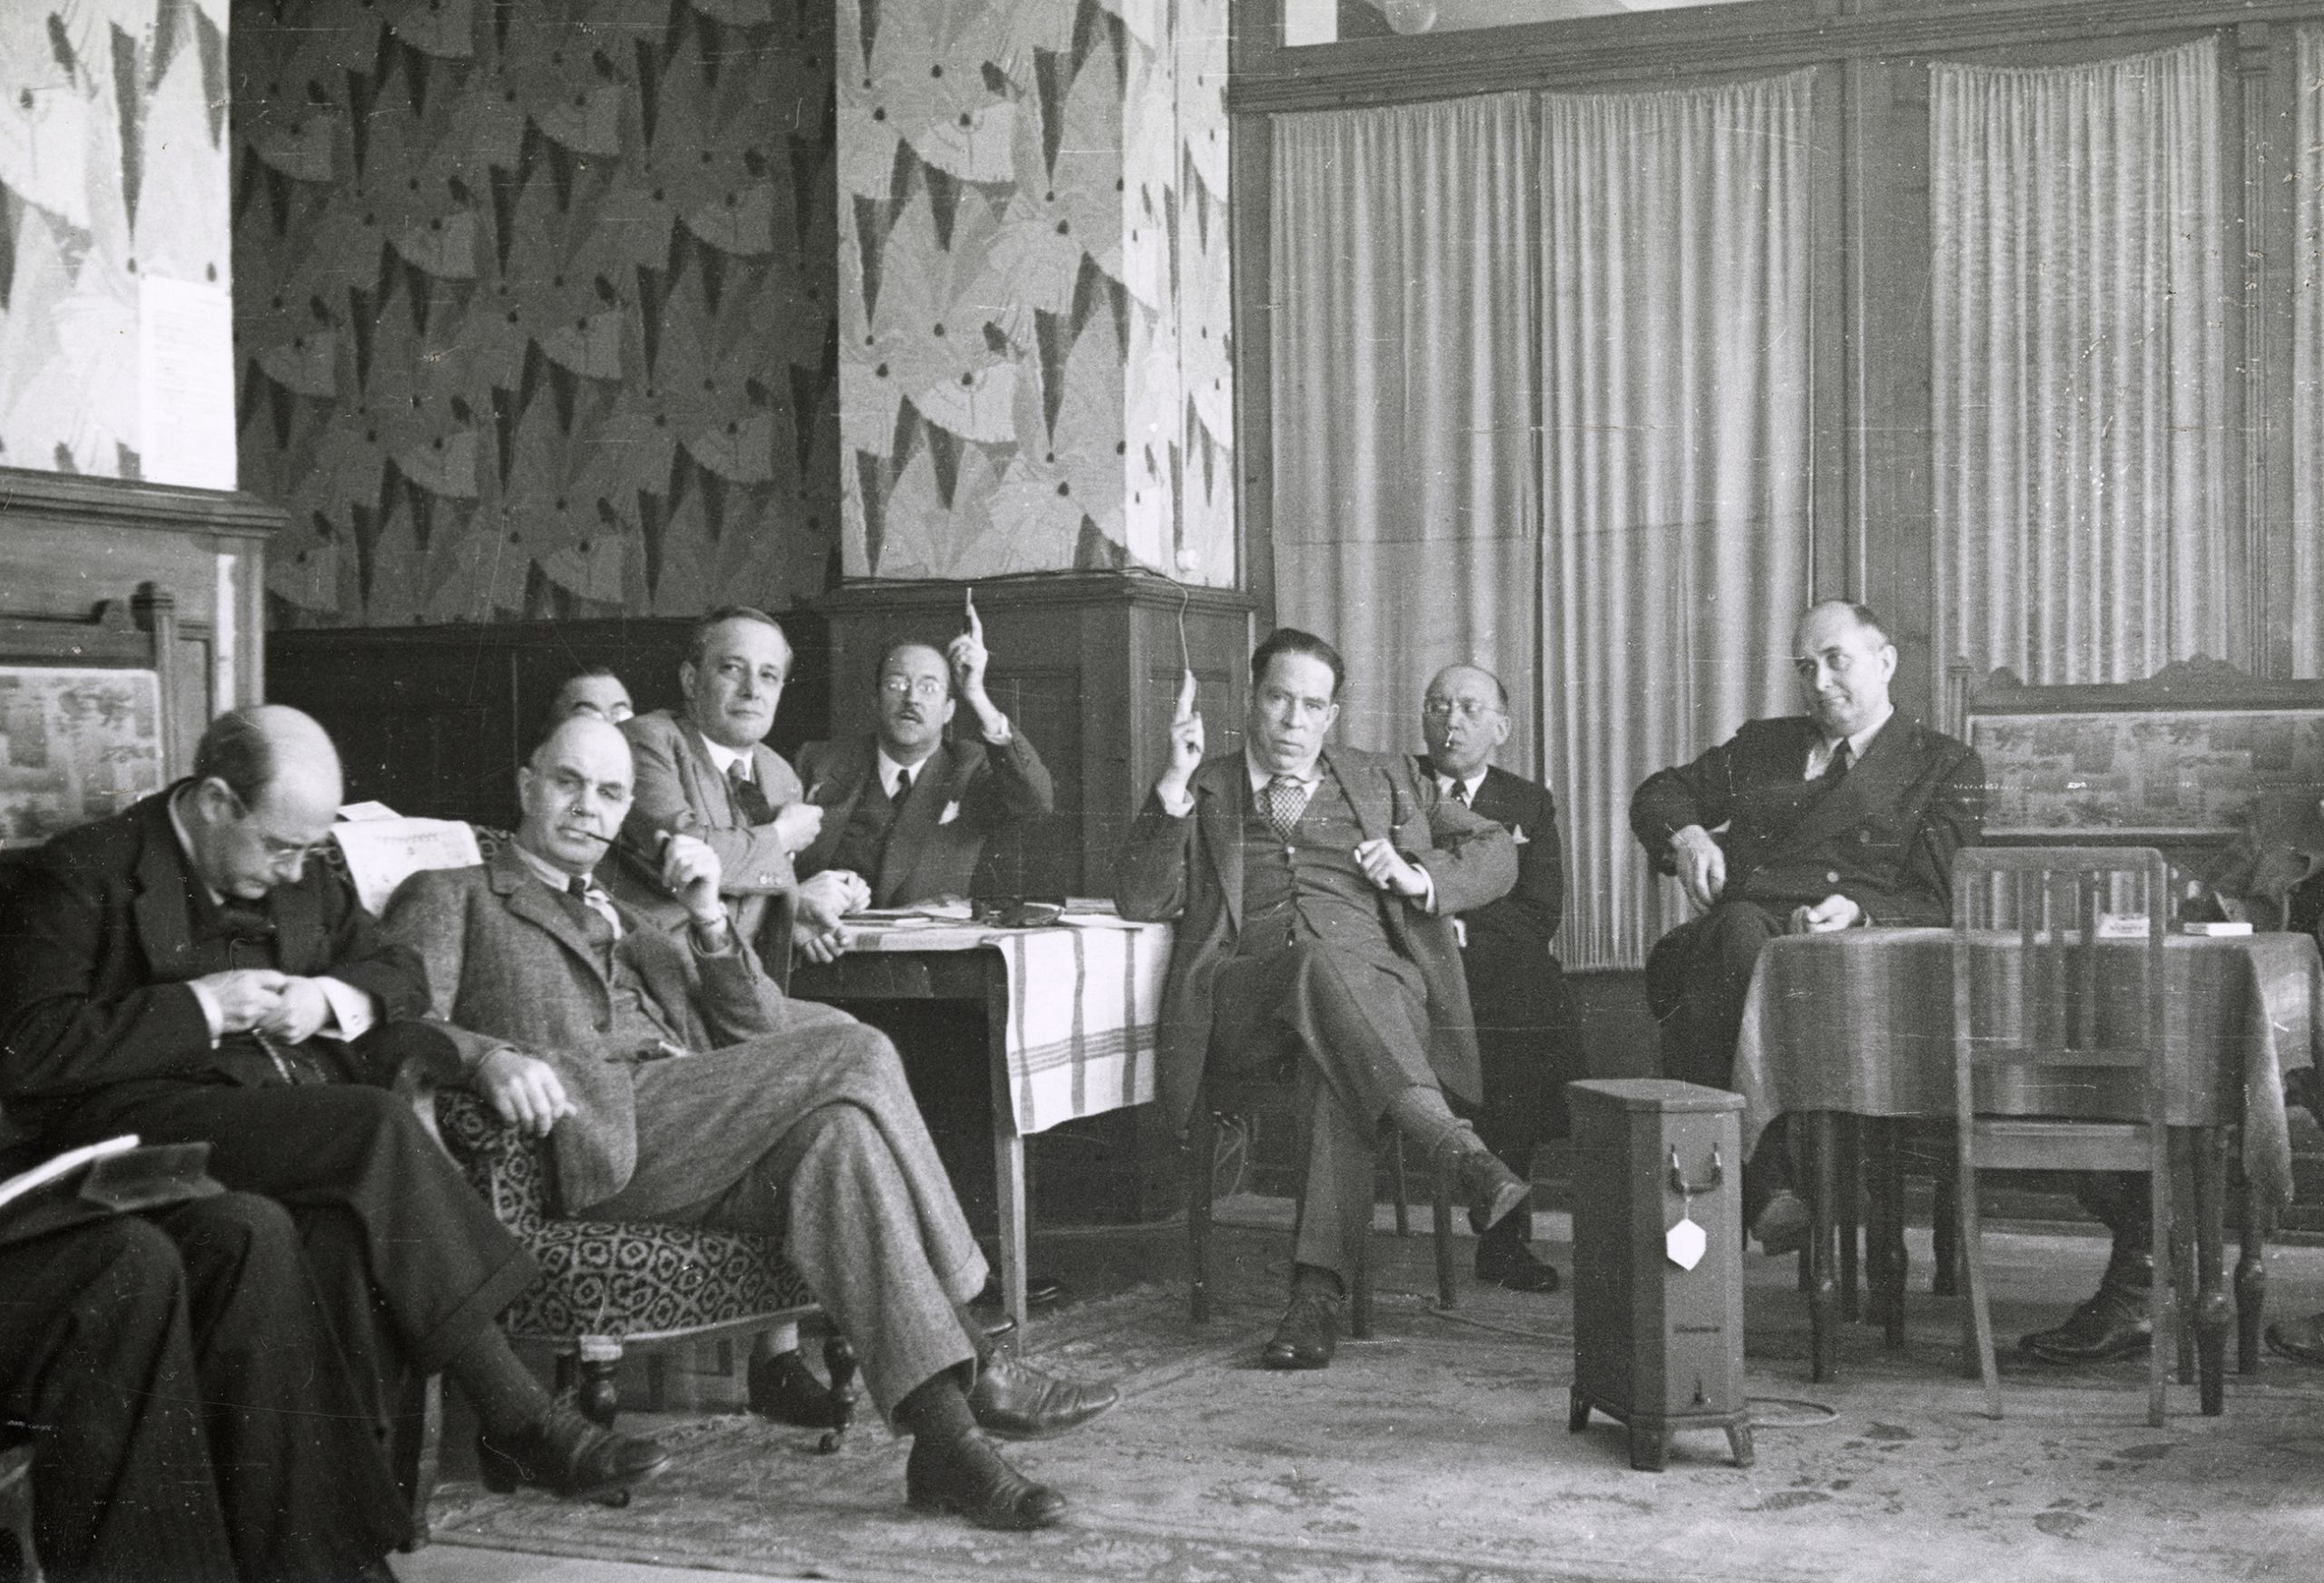 Photograph of members at the first meeting of the Mont Pelerin Society in 1947. From the Mont Pelerin Society Records, Hoover Institution Archives.